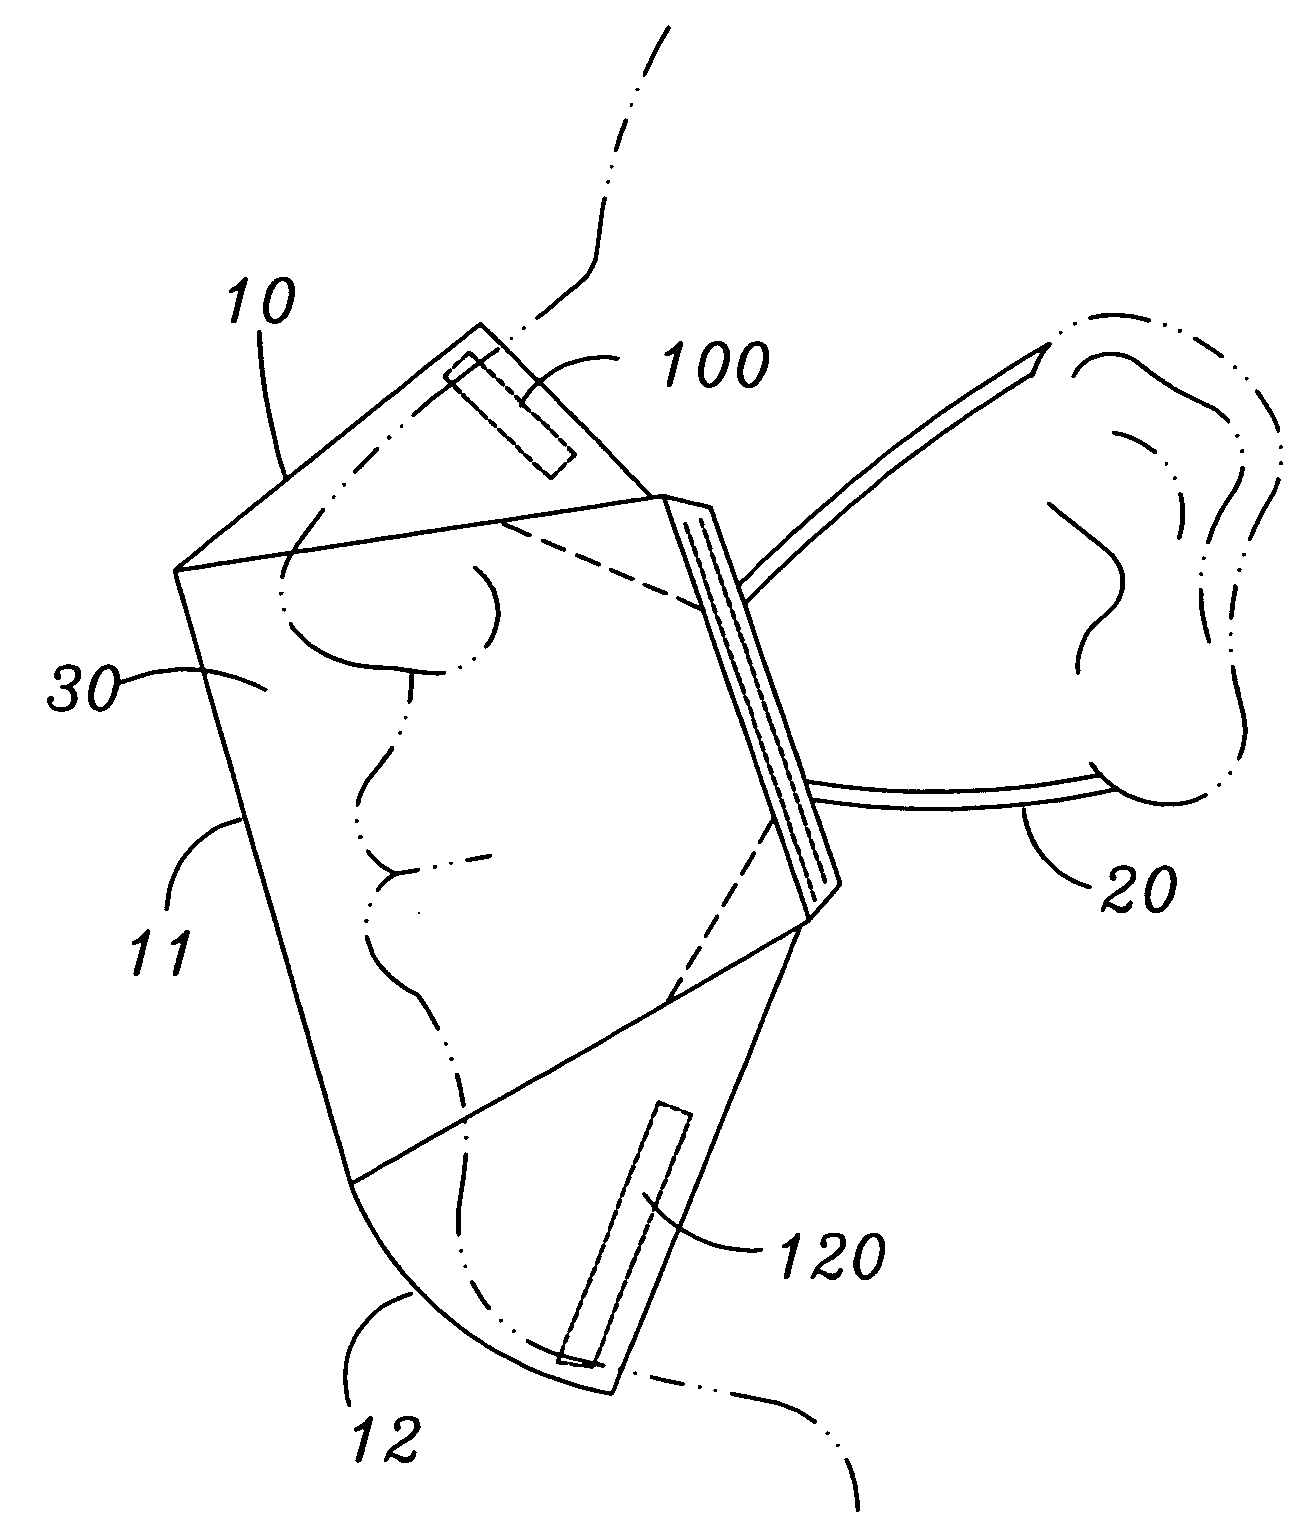 Three-dimensional structure mask